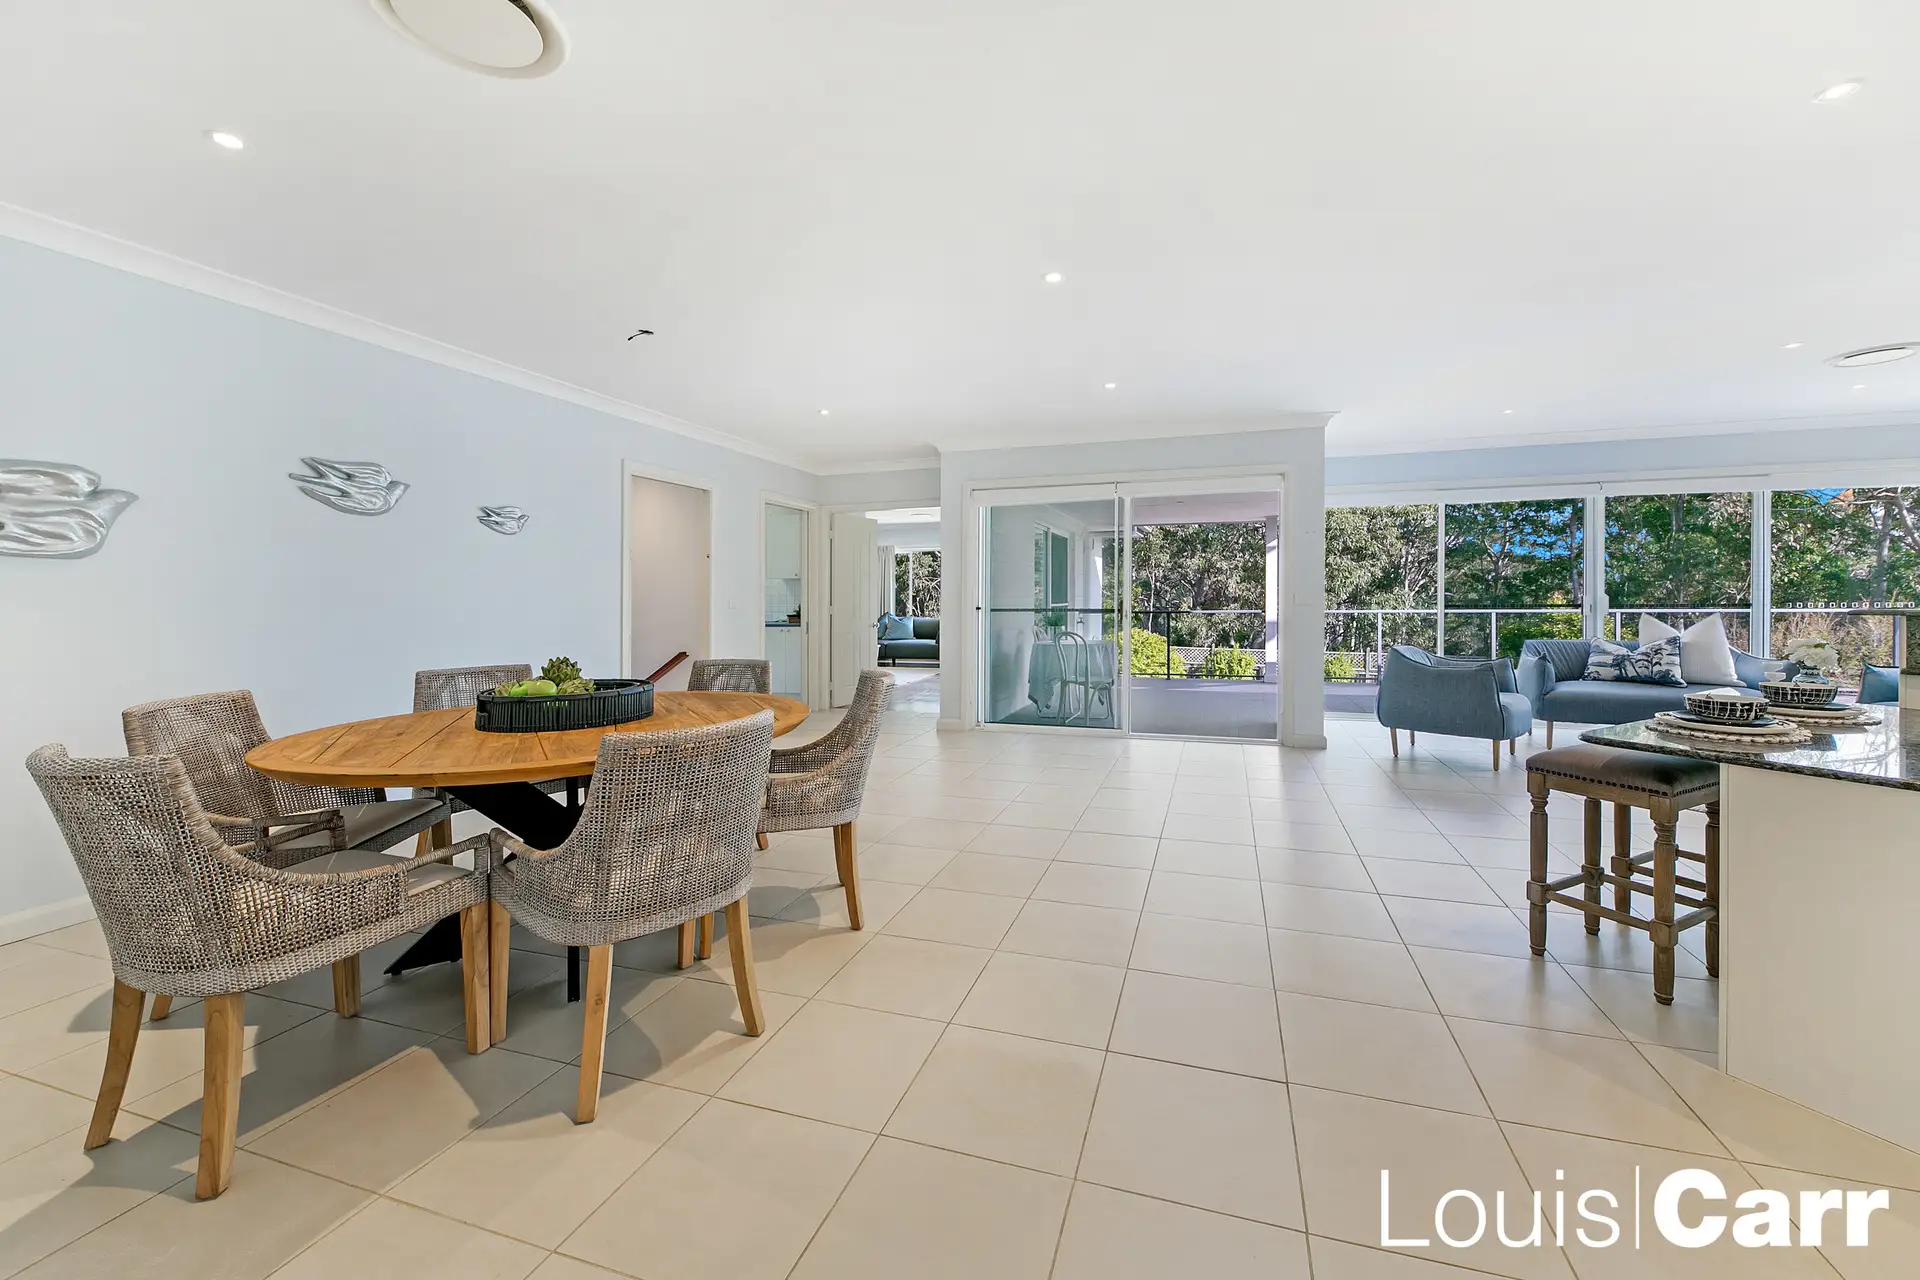 Photo #3: 22 Huntingdale Circle, Castle Hill - Sold by Louis Carr Real Estate